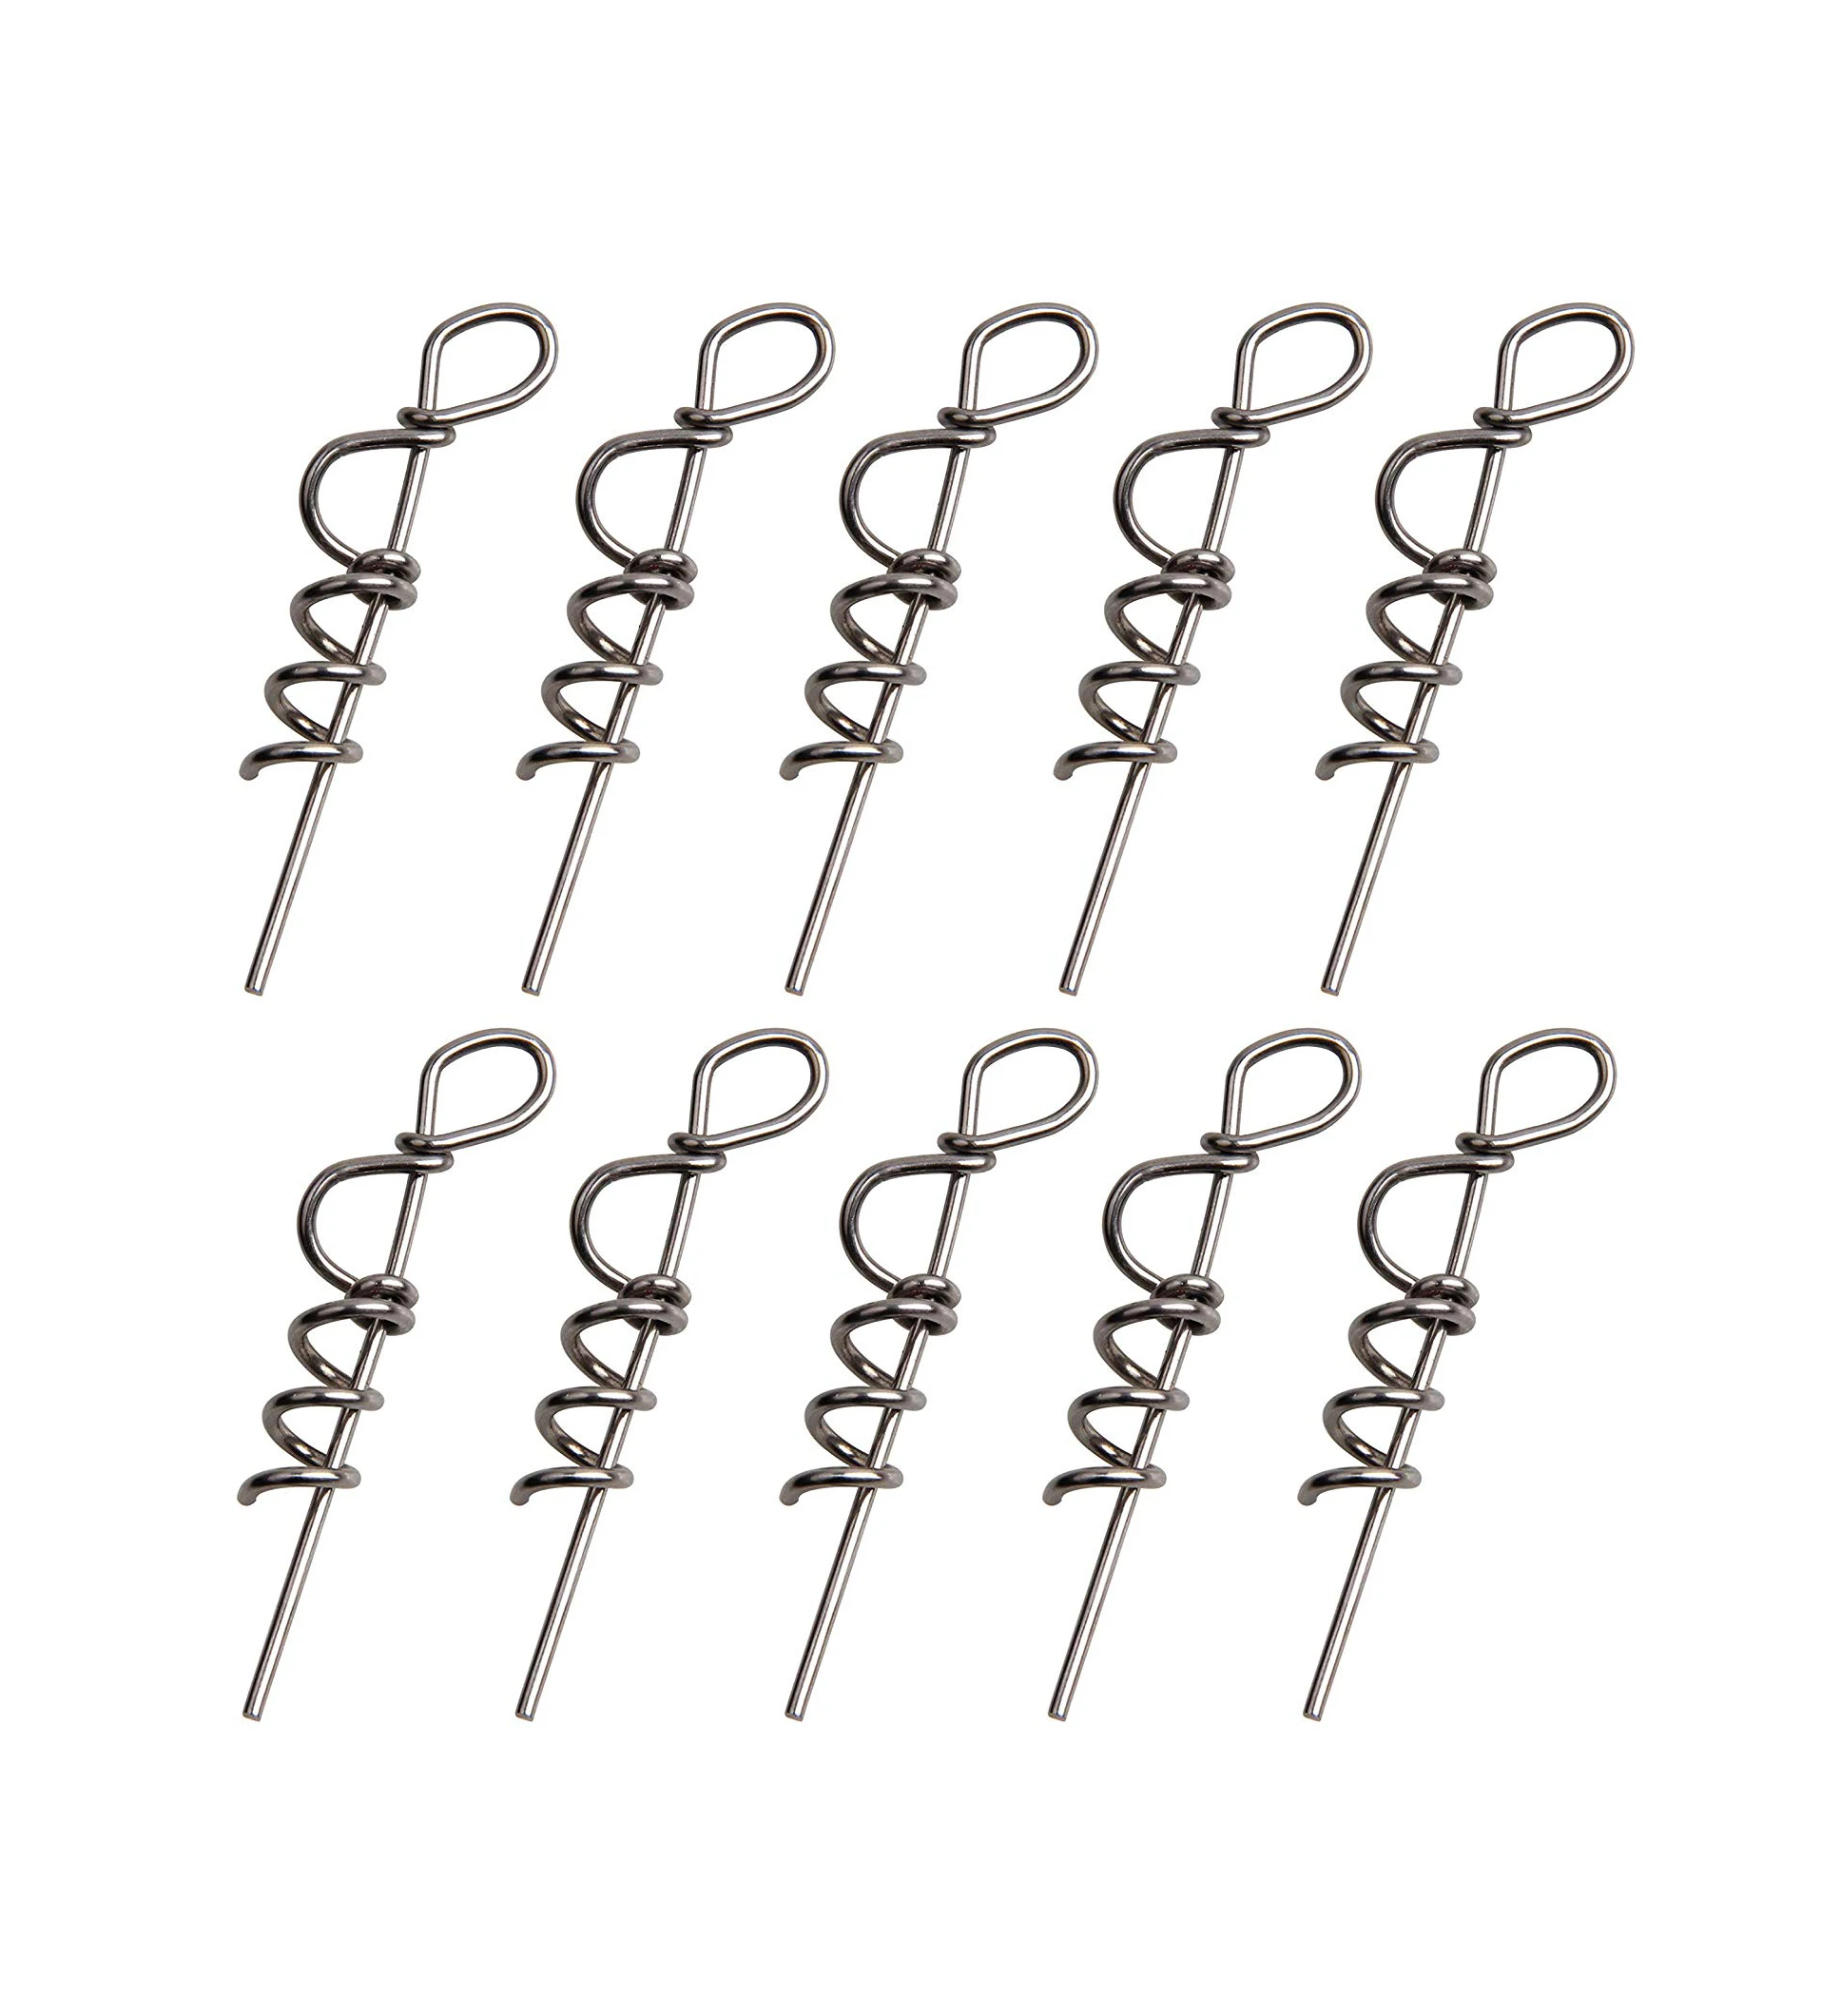 50pcs Centering Pin Spring Twist Lock Fishing Hook Fishing Baits Lure Rigs  For Soft Lure Bait Worm Crank Latch Pin Pesca